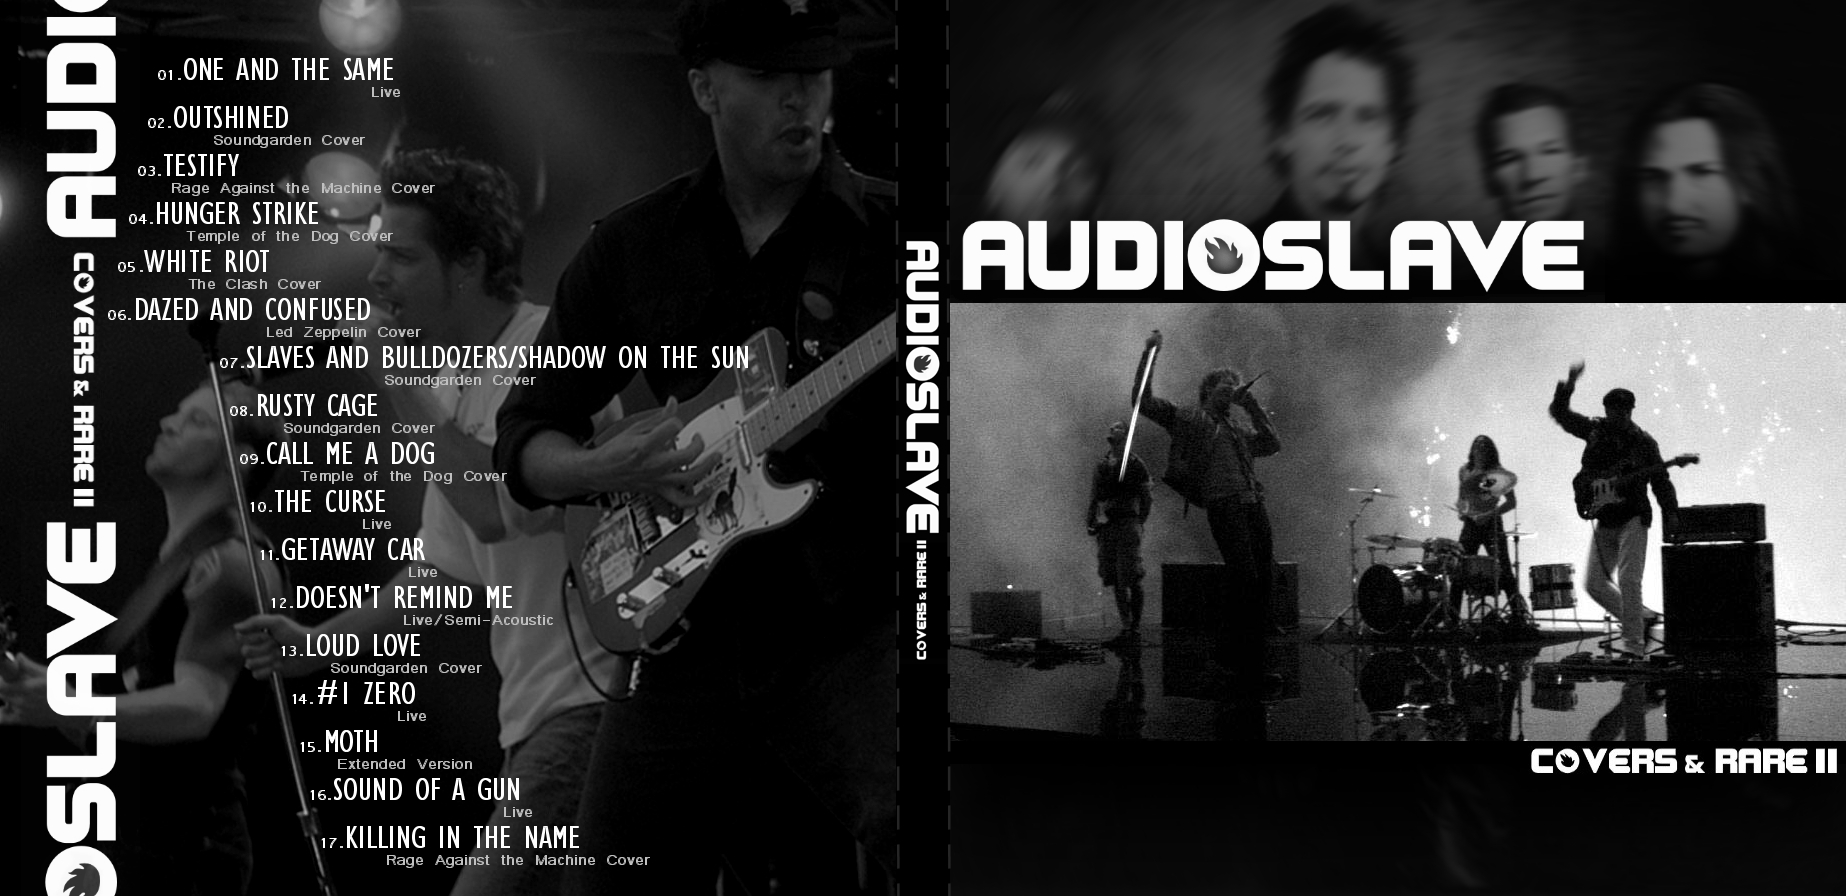 Audioslave Covers And Rare Ii By Font4na